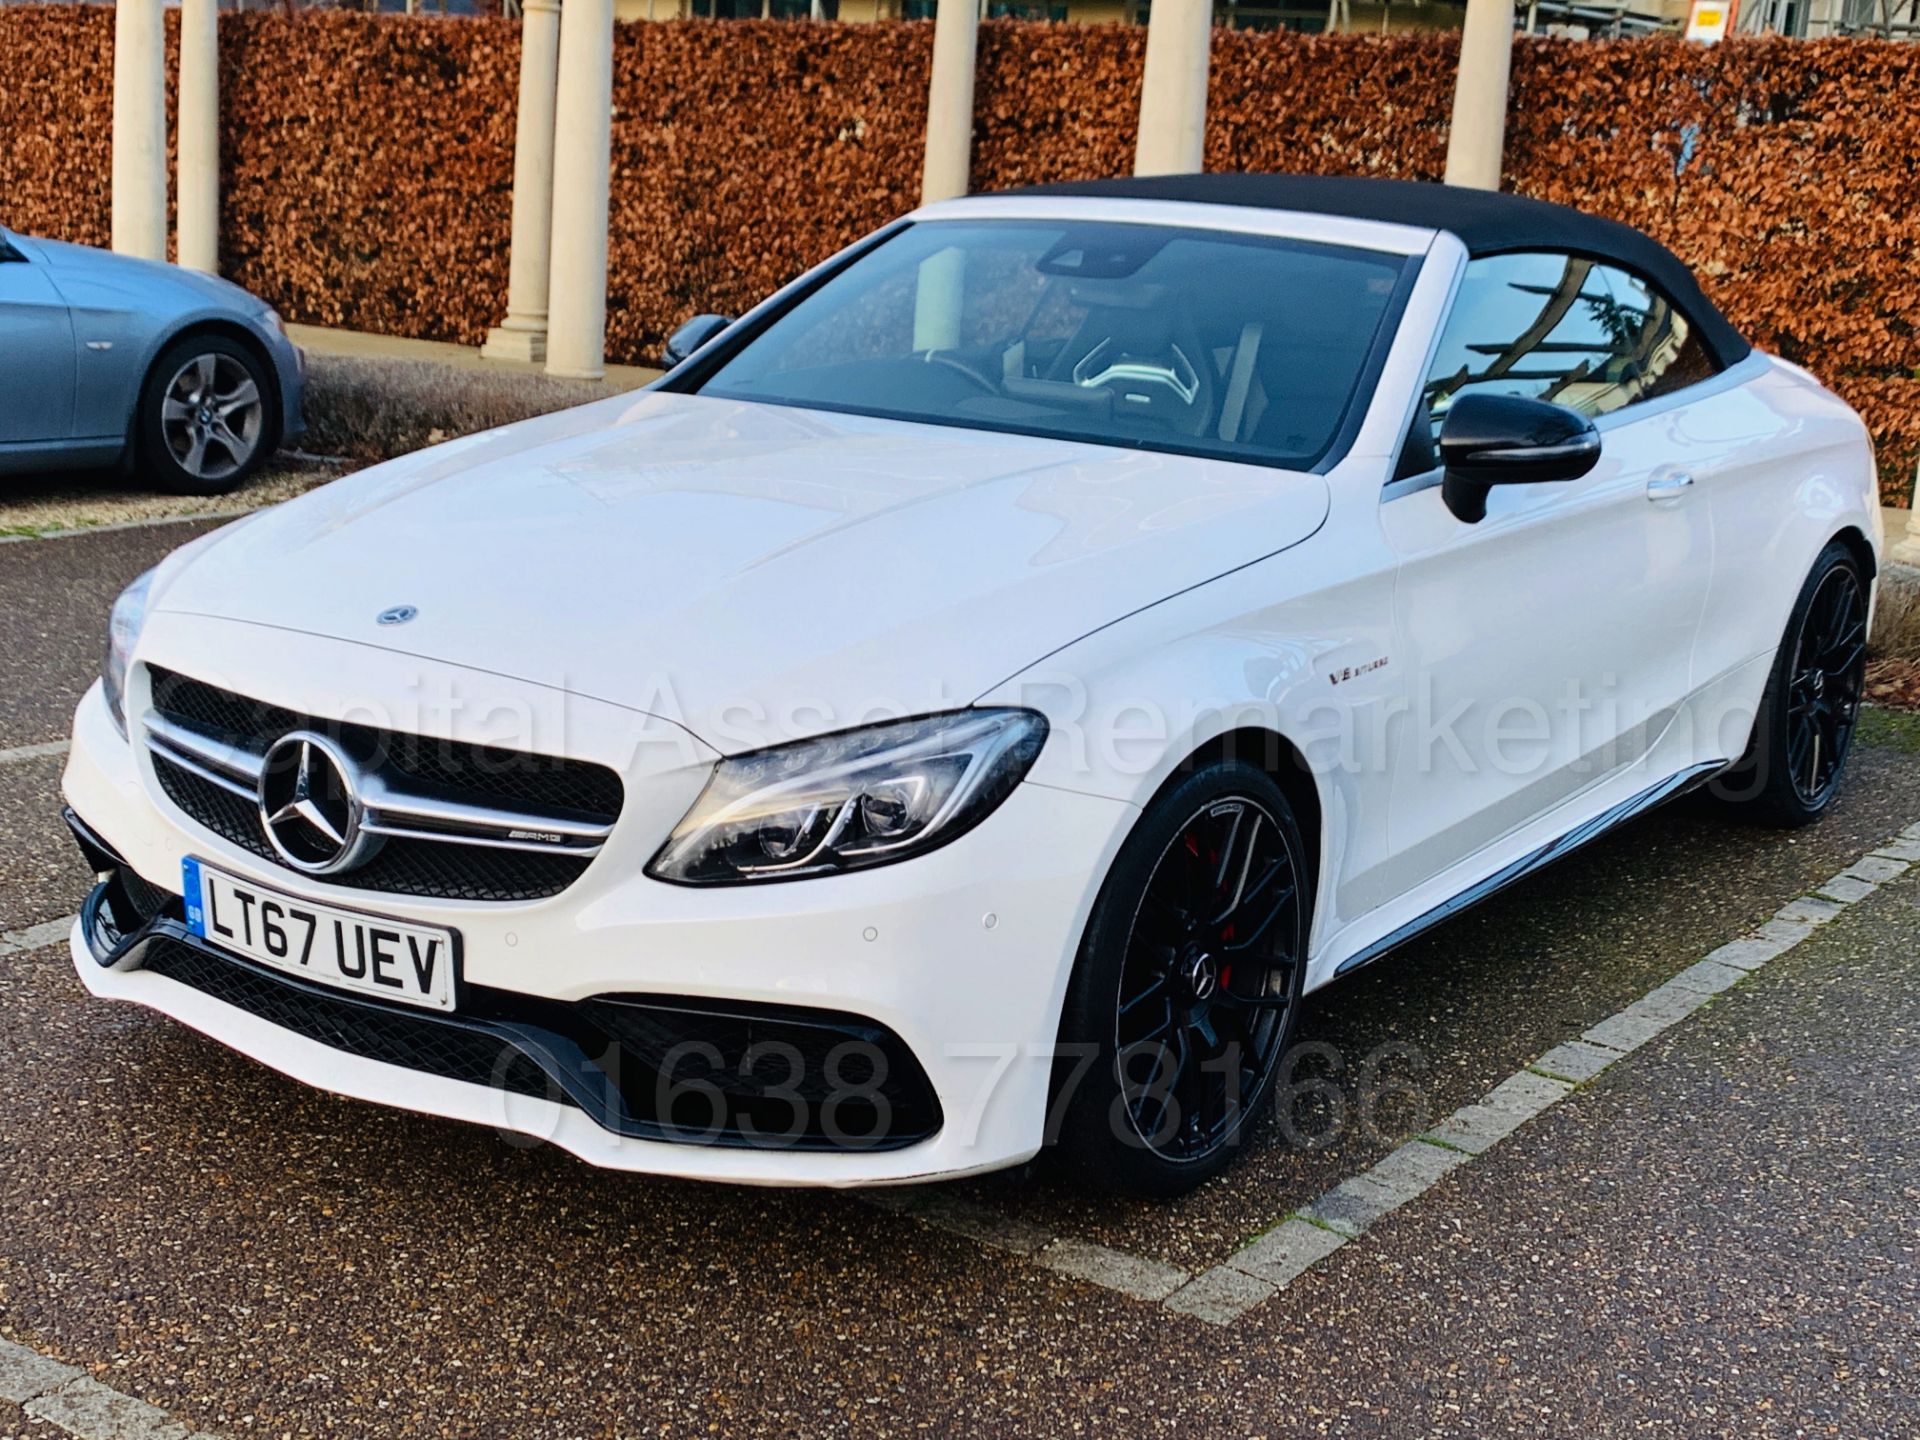 (On Sale) MERCEDES-BENZ AMG C63-S *CABRIOLET* (67 REG) '4.0 BI-TURBO -510 BHP - AUTO' *FULLY LOADED* - Image 10 of 79